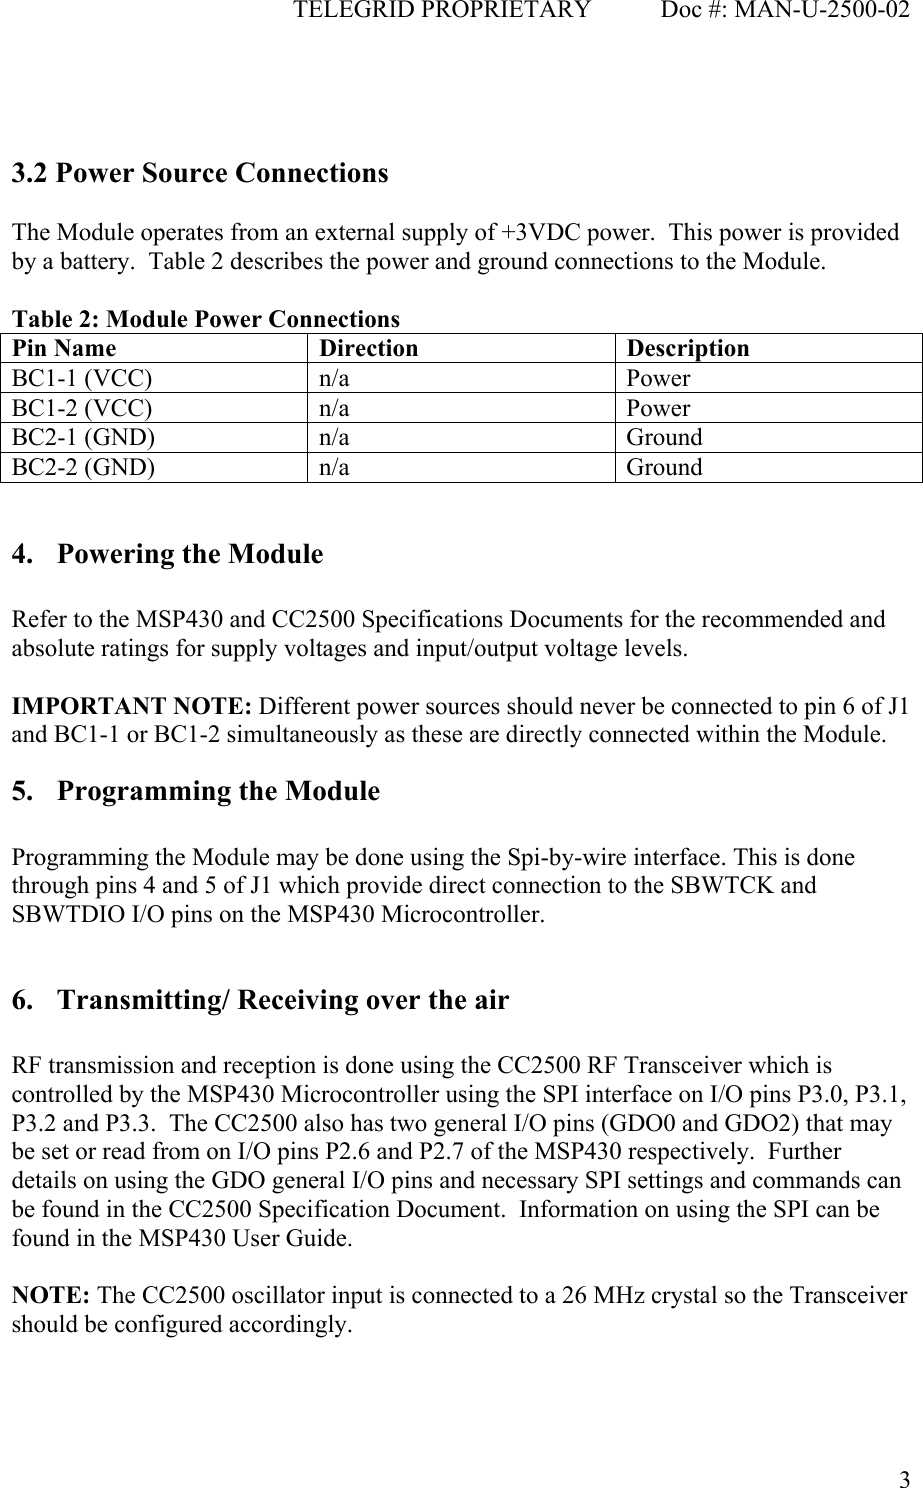                                              TELEGRID PROPRIETARY           Doc #: MAN-U-2500-02  3   3.2 Power Source Connections  The Module operates from an external supply of +3VDC power.  This power is provided by a battery.  Table 2 describes the power and ground connections to the Module.  Table 2: Module Power Connections Pin Name  Direction  Description BC1-1 (VCC)  n/a  Power BC1-2 (VCC)  n/a  Power BC2-1 (GND)  n/a  Ground BC2-2 (GND)  n/a  Ground  4. Powering the Module  Refer to the MSP430 and CC2500 Specifications Documents for the recommended and absolute ratings for supply voltages and input/output voltage levels.  IMPORTANT NOTE: Different power sources should never be connected to pin 6 of J1 and BC1-1 or BC1-2 simultaneously as these are directly connected within the Module.  5. Programming the Module  Programming the Module may be done using the Spi-by-wire interface. This is done through pins 4 and 5 of J1 which provide direct connection to the SBWTCK and SBWTDIO I/O pins on the MSP430 Microcontroller.  6. Transmitting/ Receiving over the air  RF transmission and reception is done using the CC2500 RF Transceiver which is controlled by the MSP430 Microcontroller using the SPI interface on I/O pins P3.0, P3.1, P3.2 and P3.3.  The CC2500 also has two general I/O pins (GDO0 and GDO2) that may be set or read from on I/O pins P2.6 and P2.7 of the MSP430 respectively.  Further details on using the GDO general I/O pins and necessary SPI settings and commands can be found in the CC2500 Specification Document.  Information on using the SPI can be found in the MSP430 User Guide.  NOTE: The CC2500 oscillator input is connected to a 26 MHz crystal so the Transceiver should be configured accordingly.  